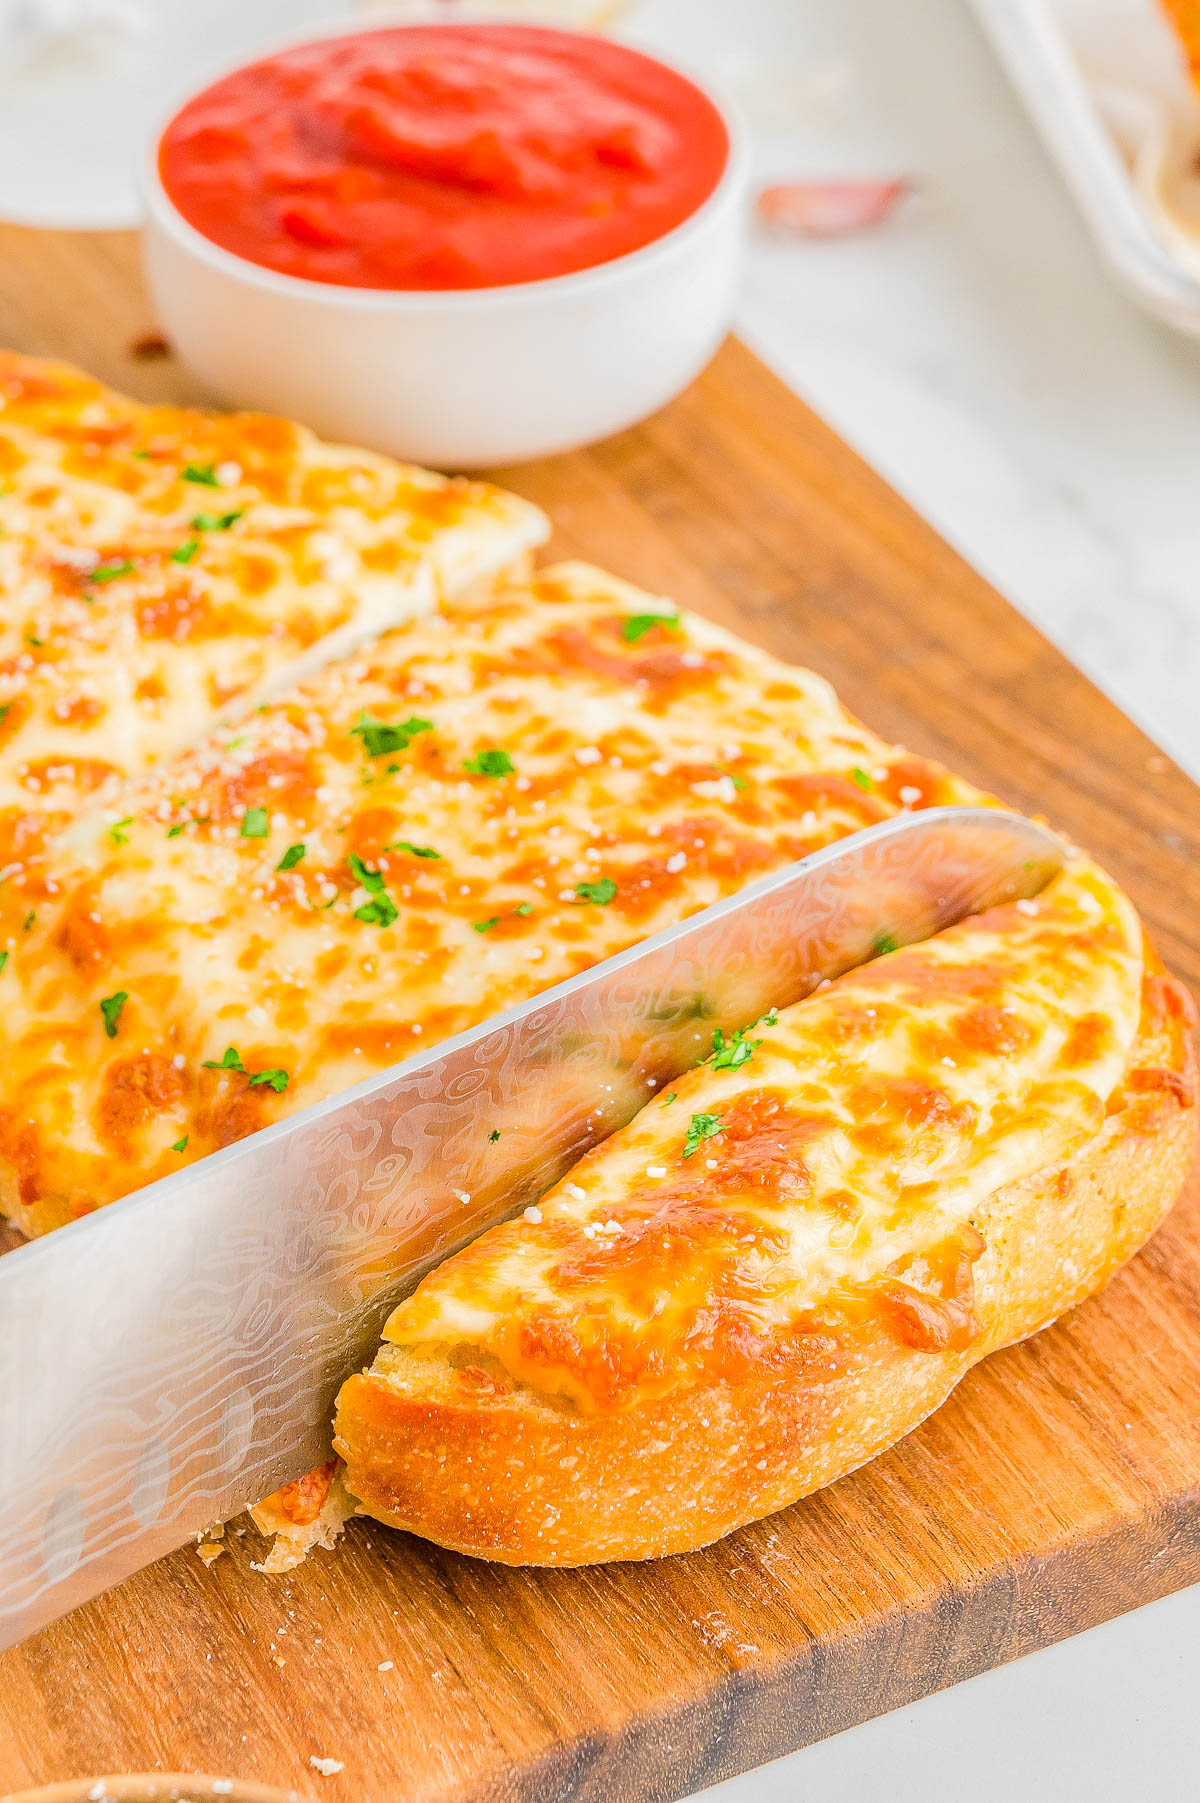 Easy Cheesy Garlic Bread - French bread that's been brushed with melted garlic butter and Italian seasoning, then topped with mounds of mozzarella and Parmesan cheeses, and baked to perfection is what this EASY appetizer, snack, or side is all about! Garlic bread with cheese is a family favorite that no one can resist and ready in just 15 minutes!